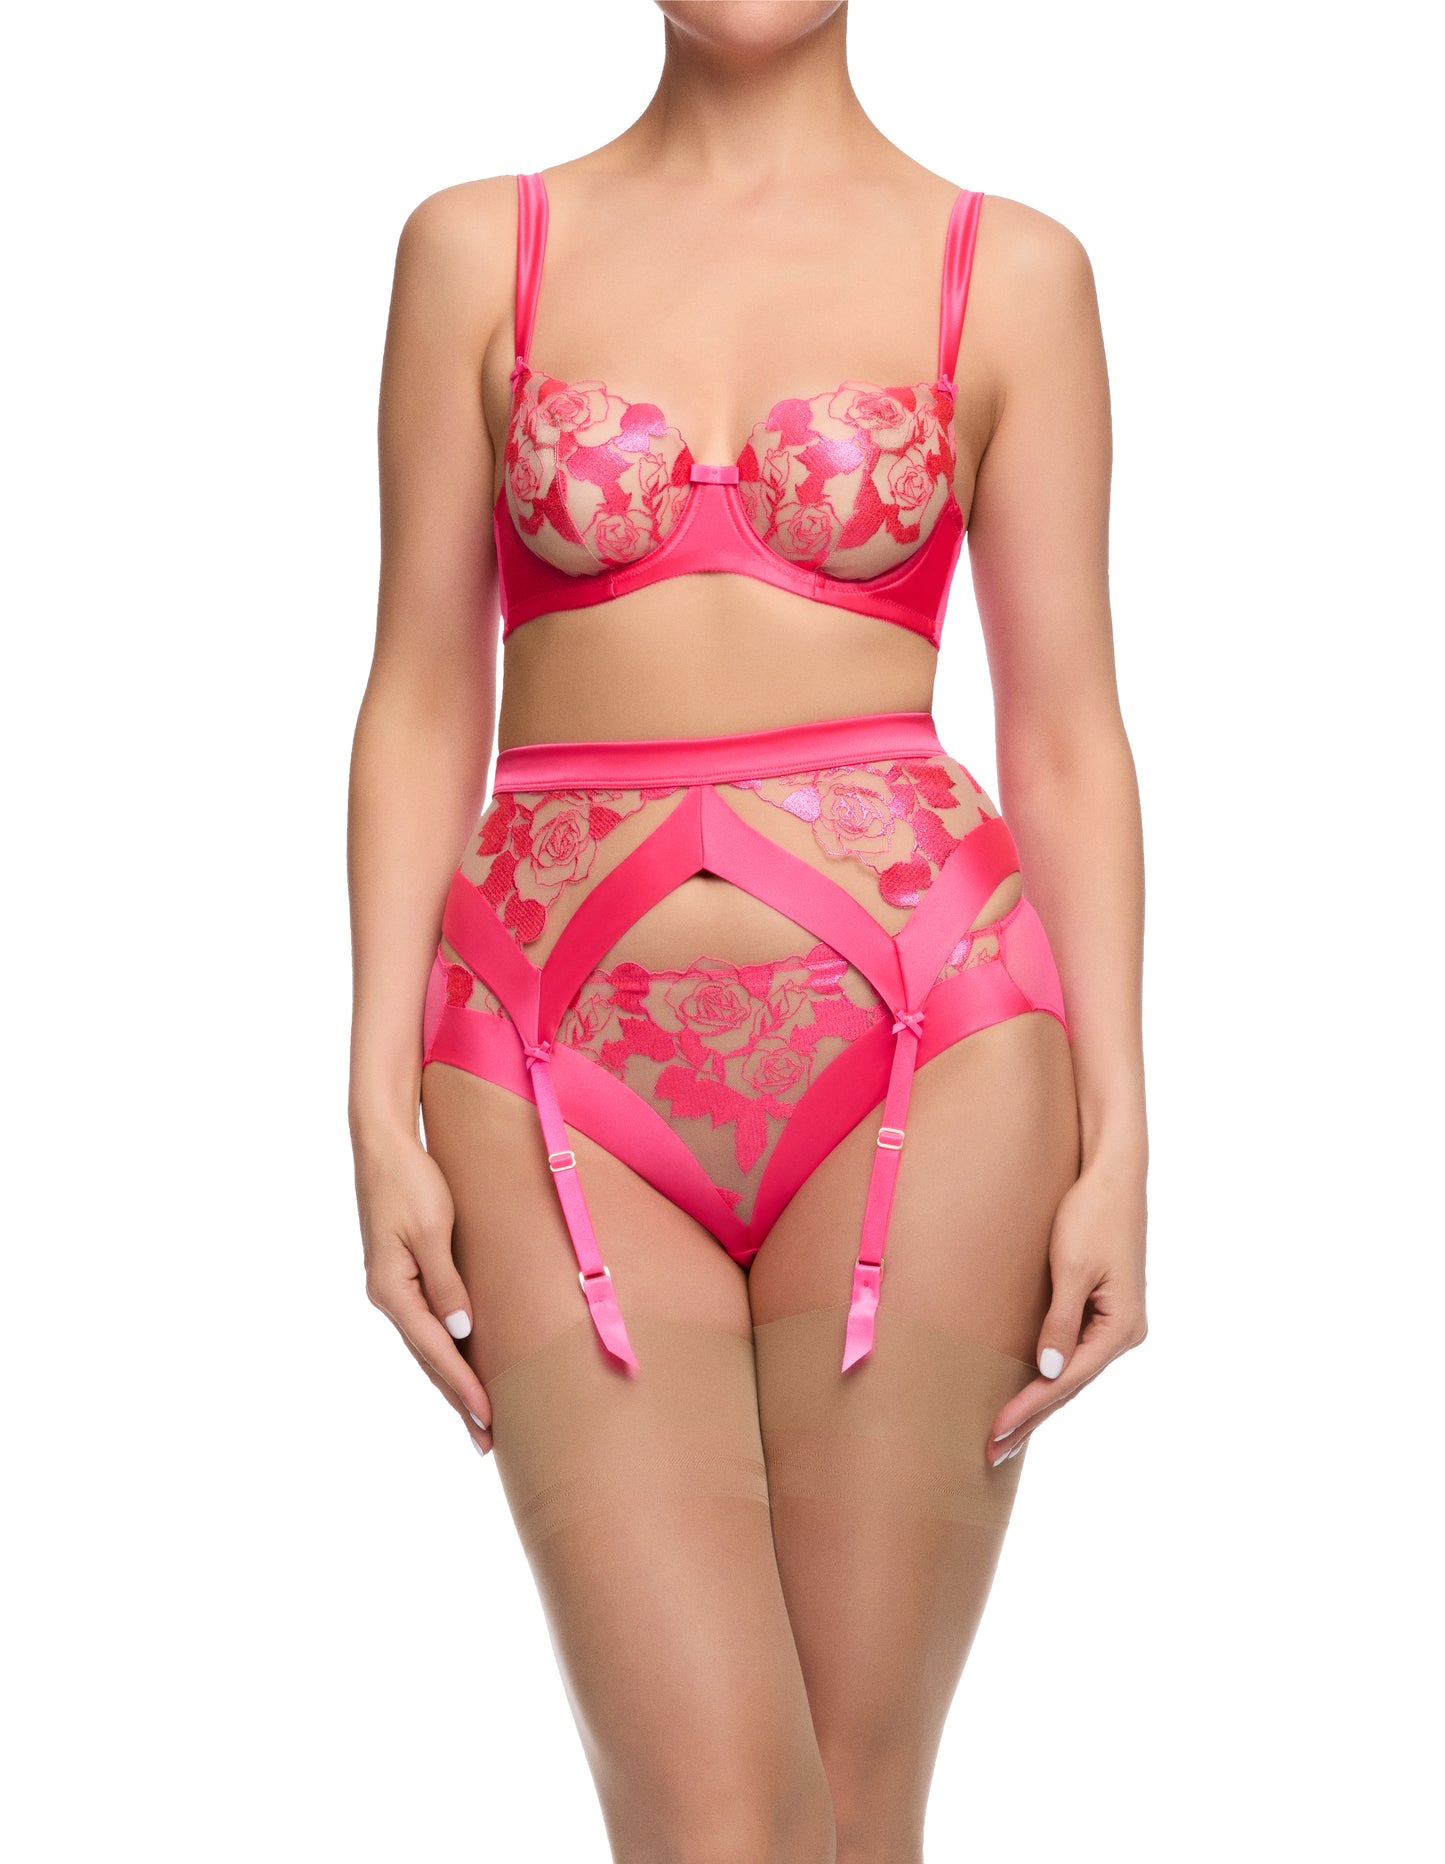 Rosabelle in Pink Pizzazz By Dita Von Teese - 32-38 B-G